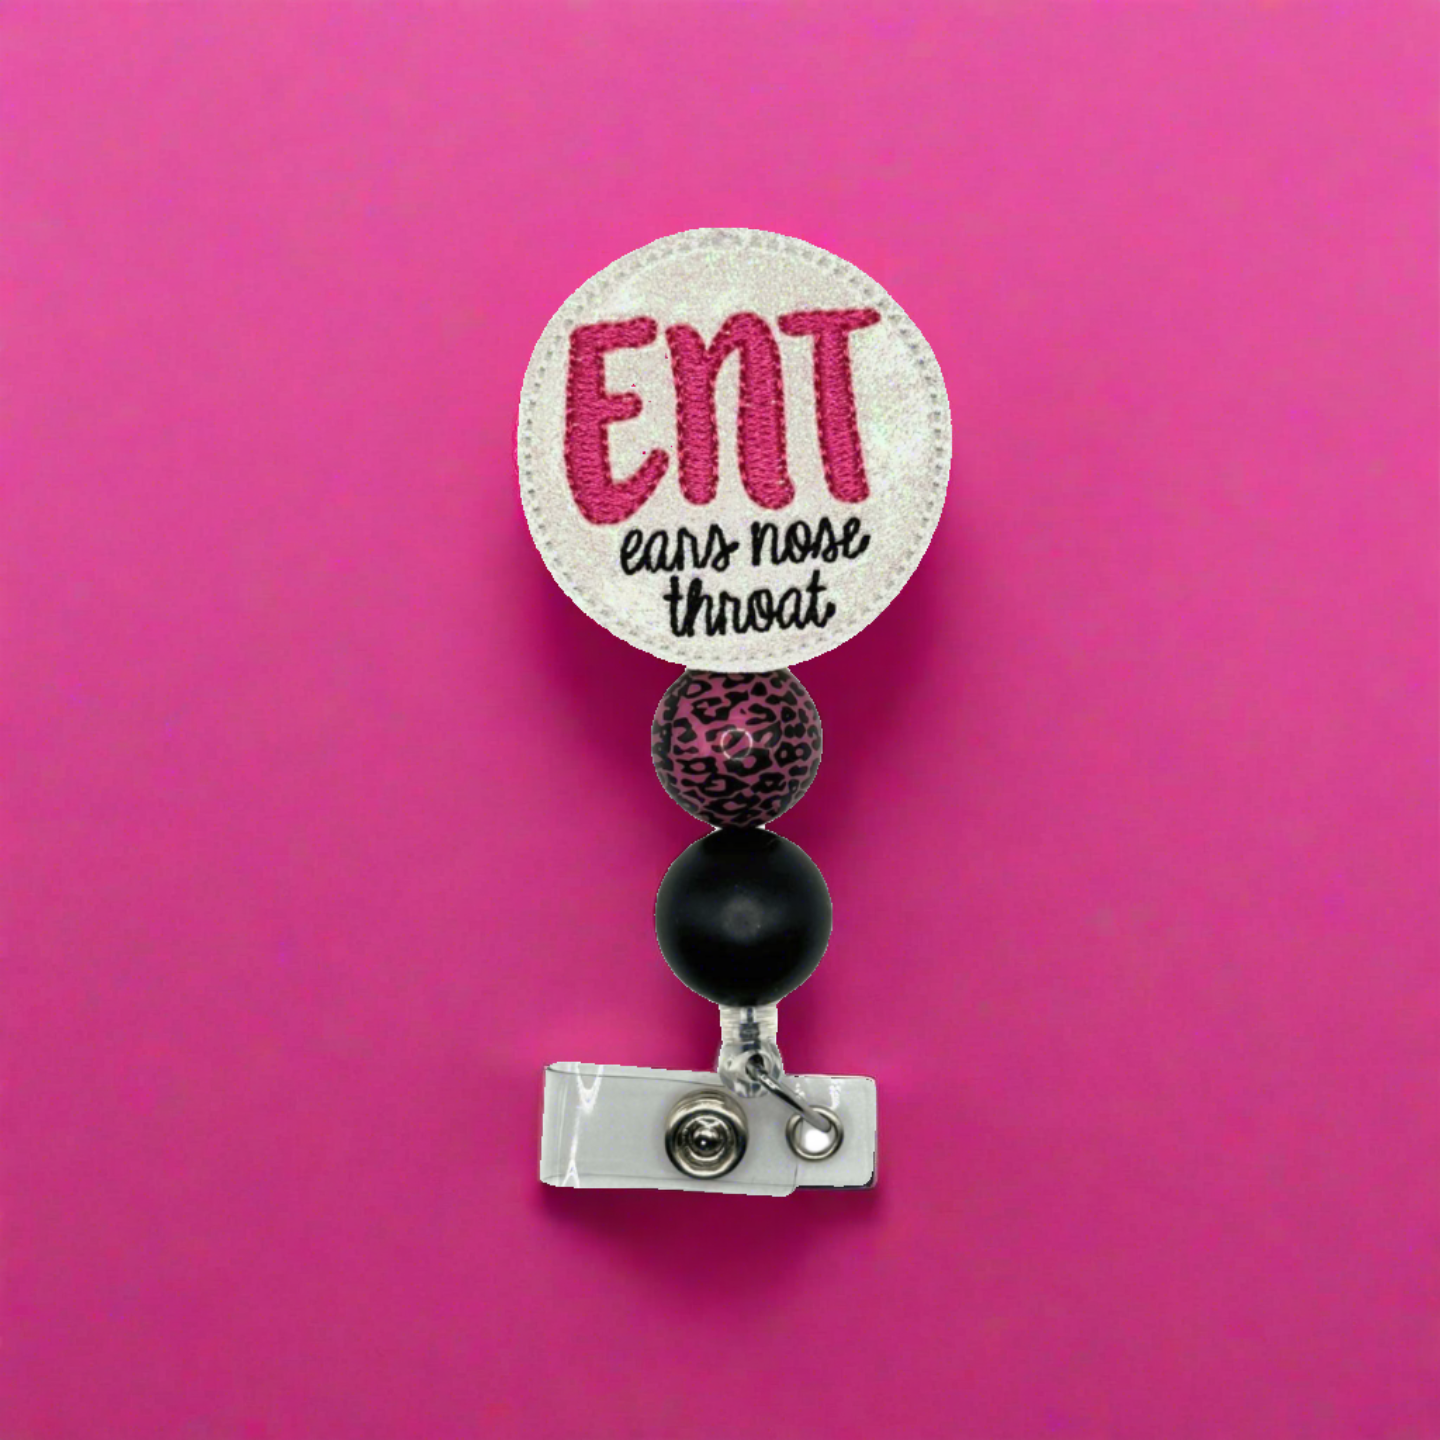 Ear nose and throat badge reel